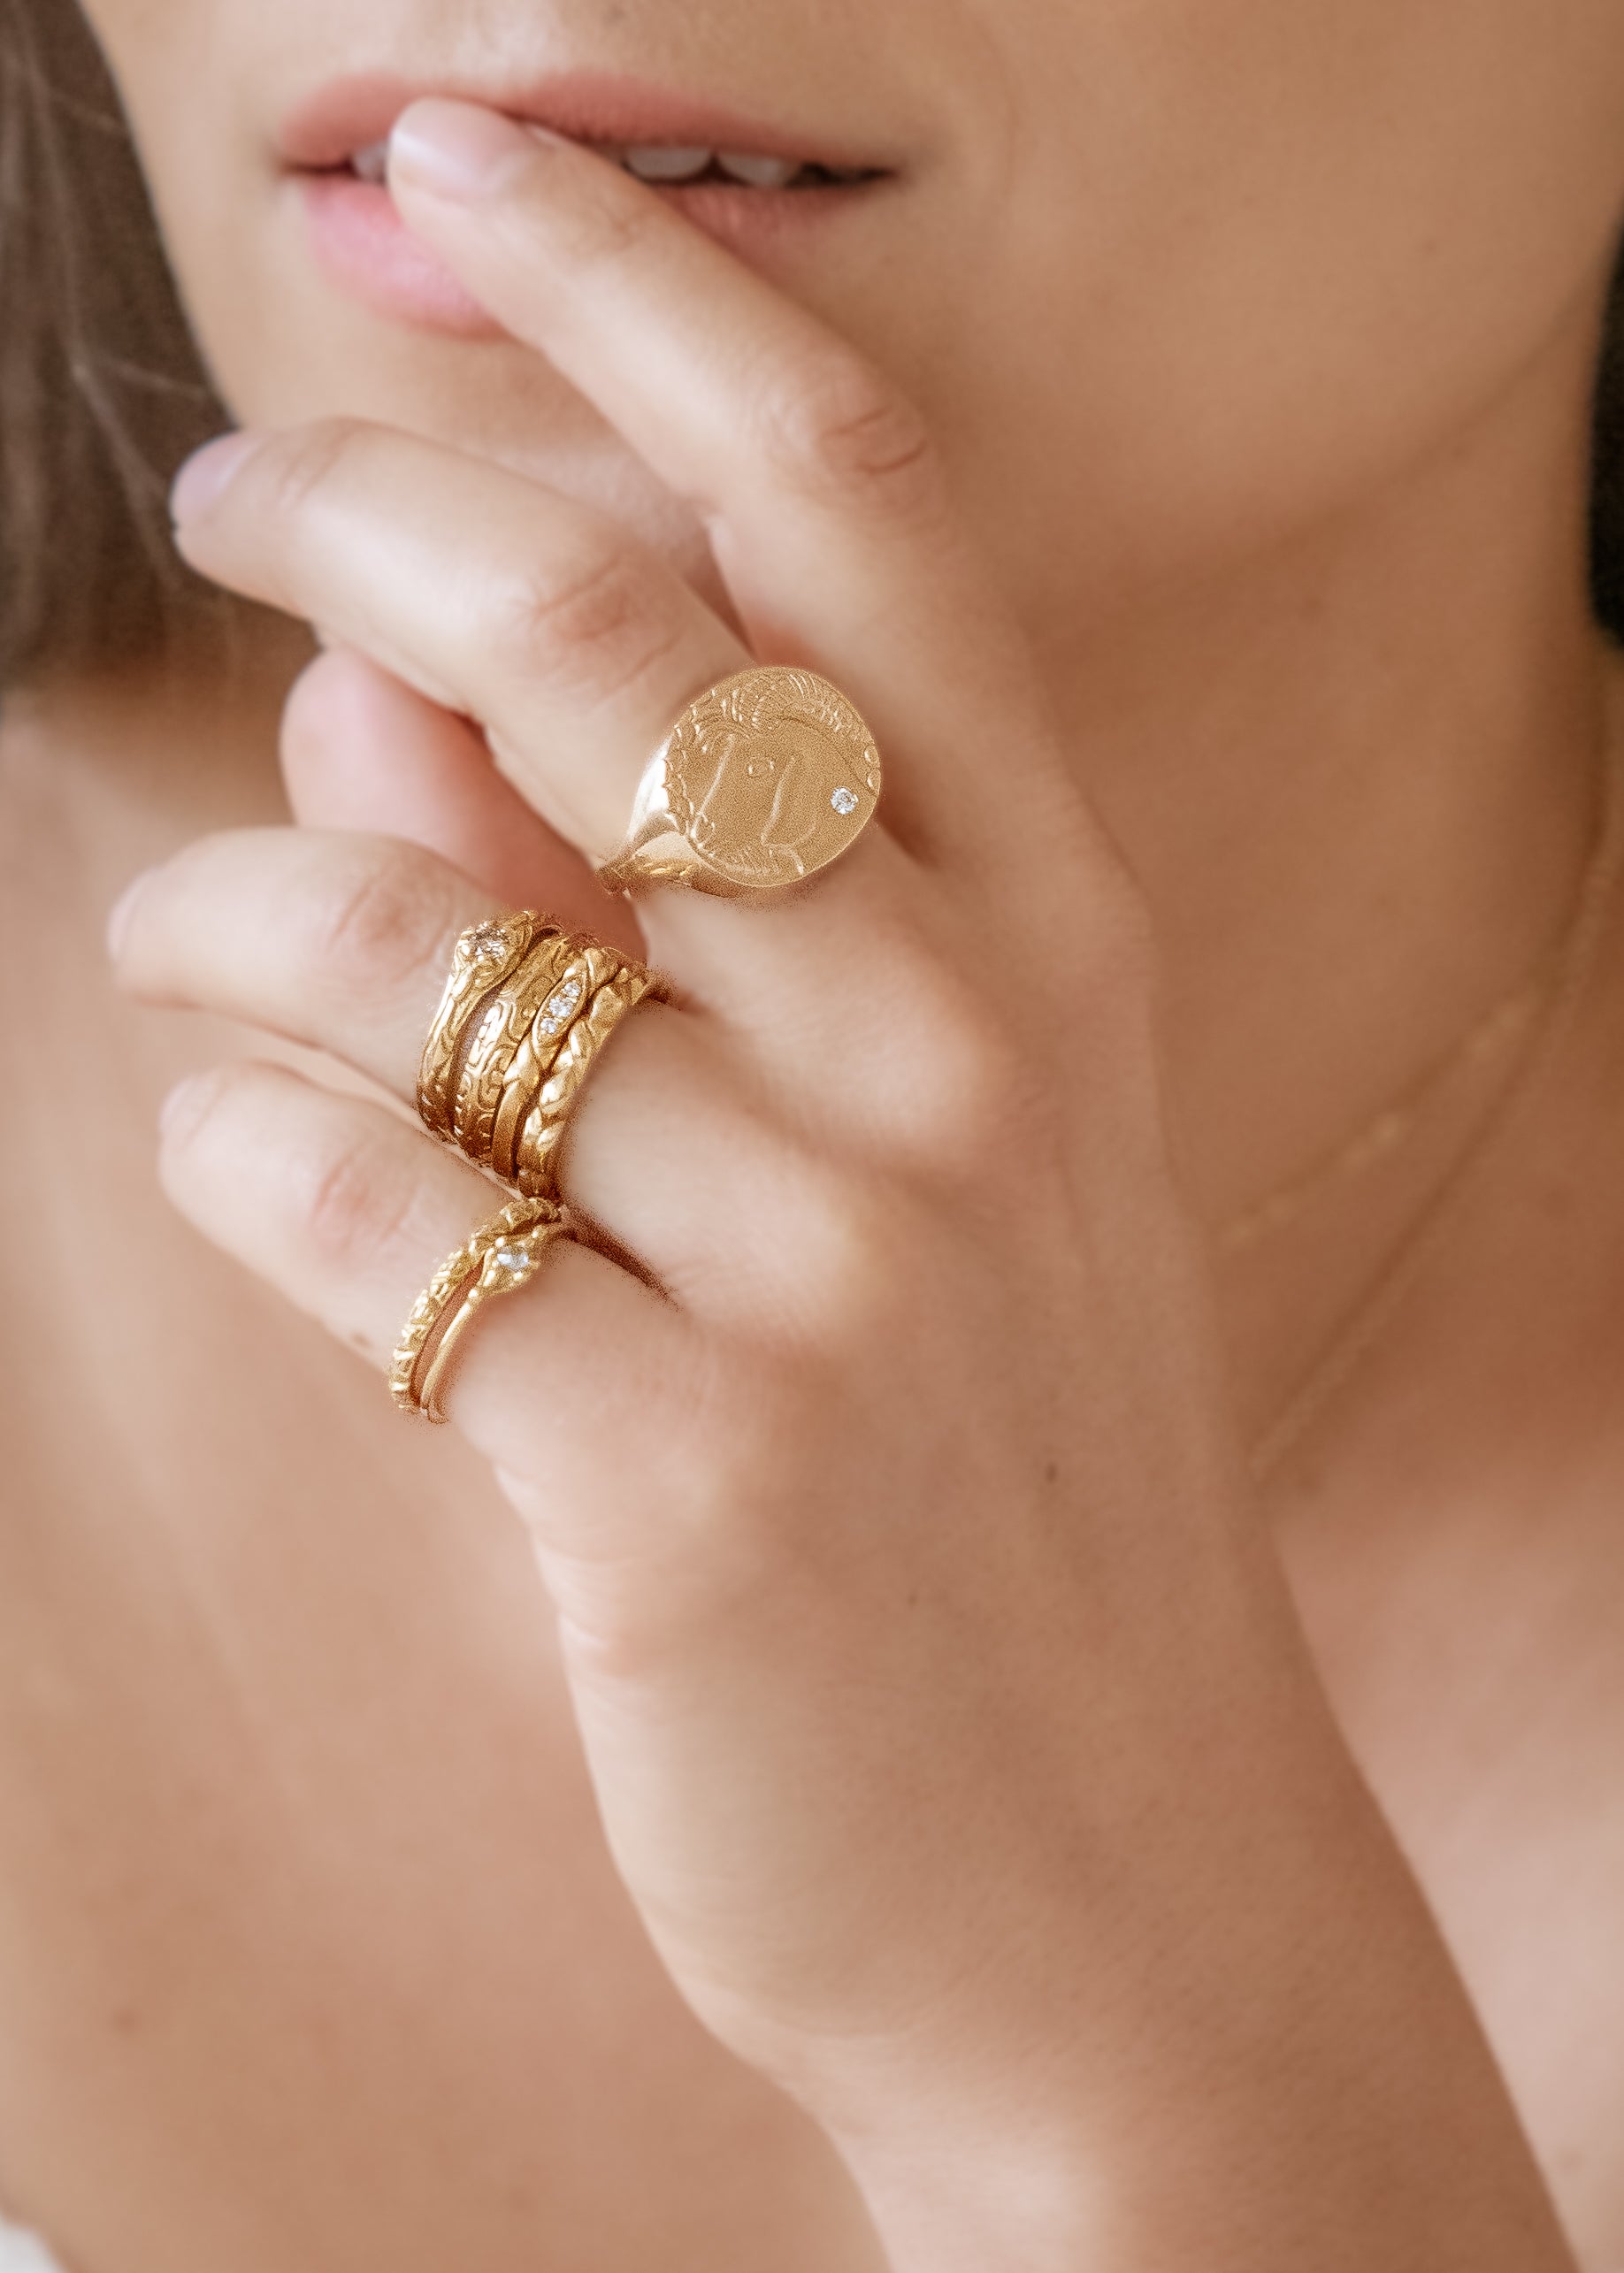 Out of many, one. The hand-carved Sheaf ring creates a woven braid pattern out of a single band of gold—a piece at once current and timeless.